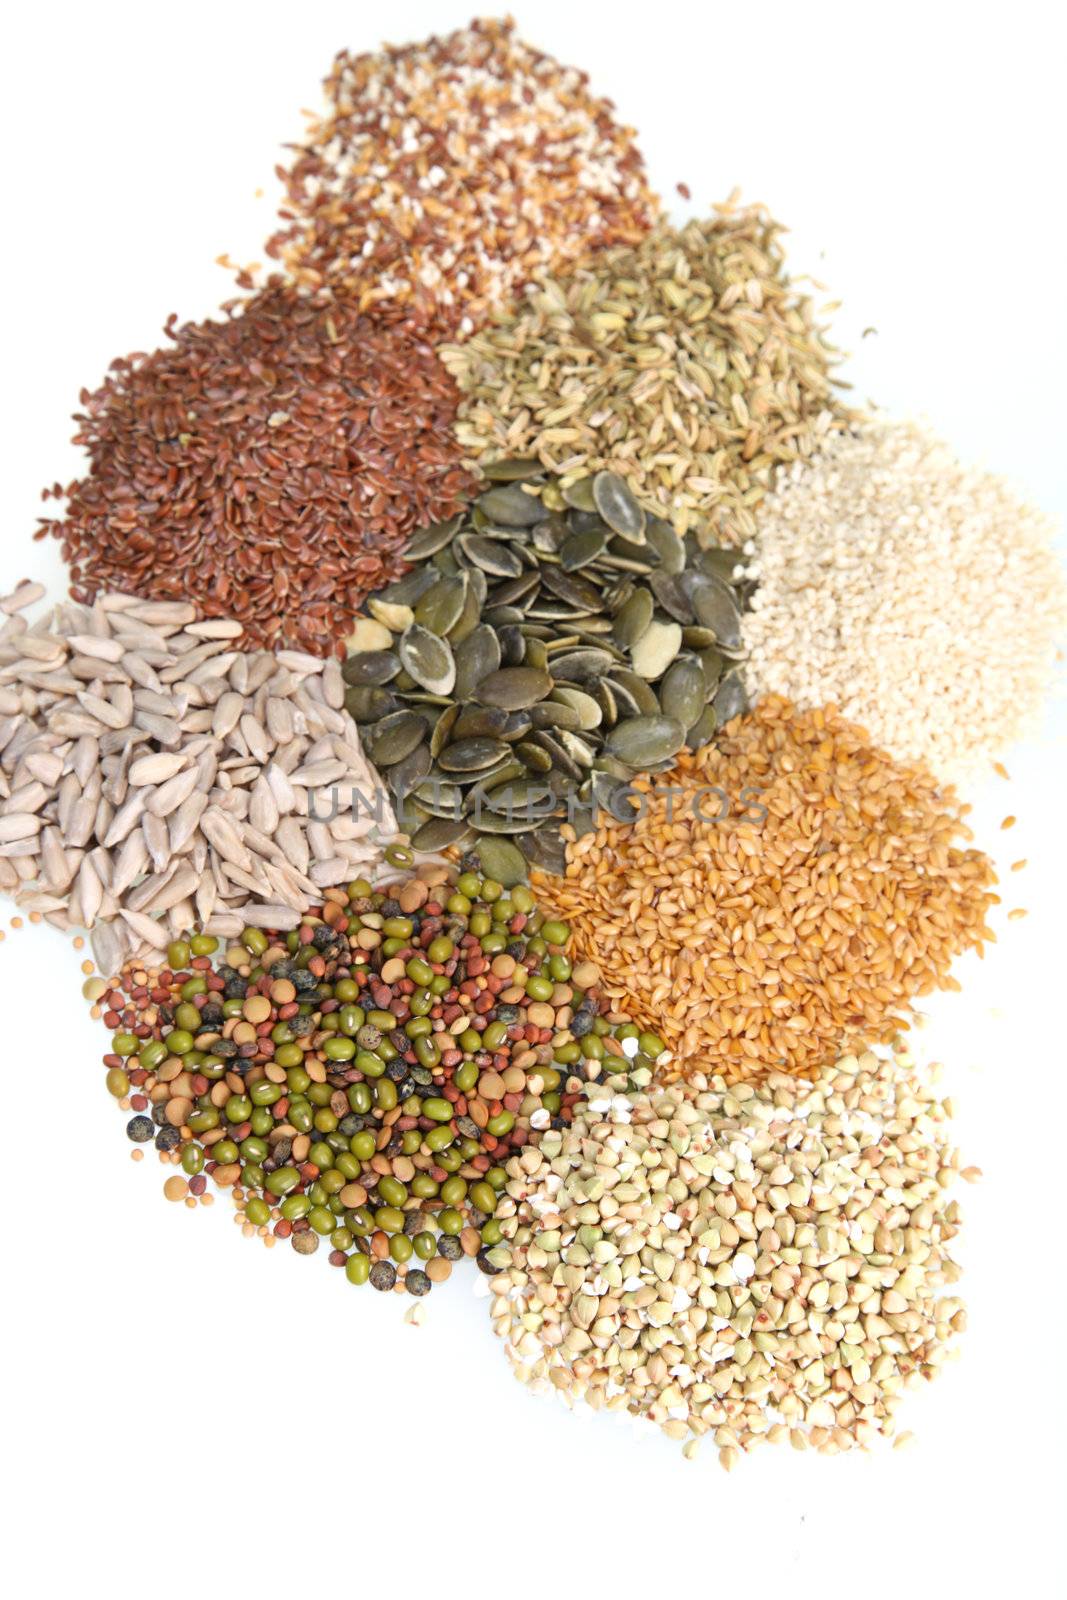 Mixed seeds arranged on a white background by Farina6000